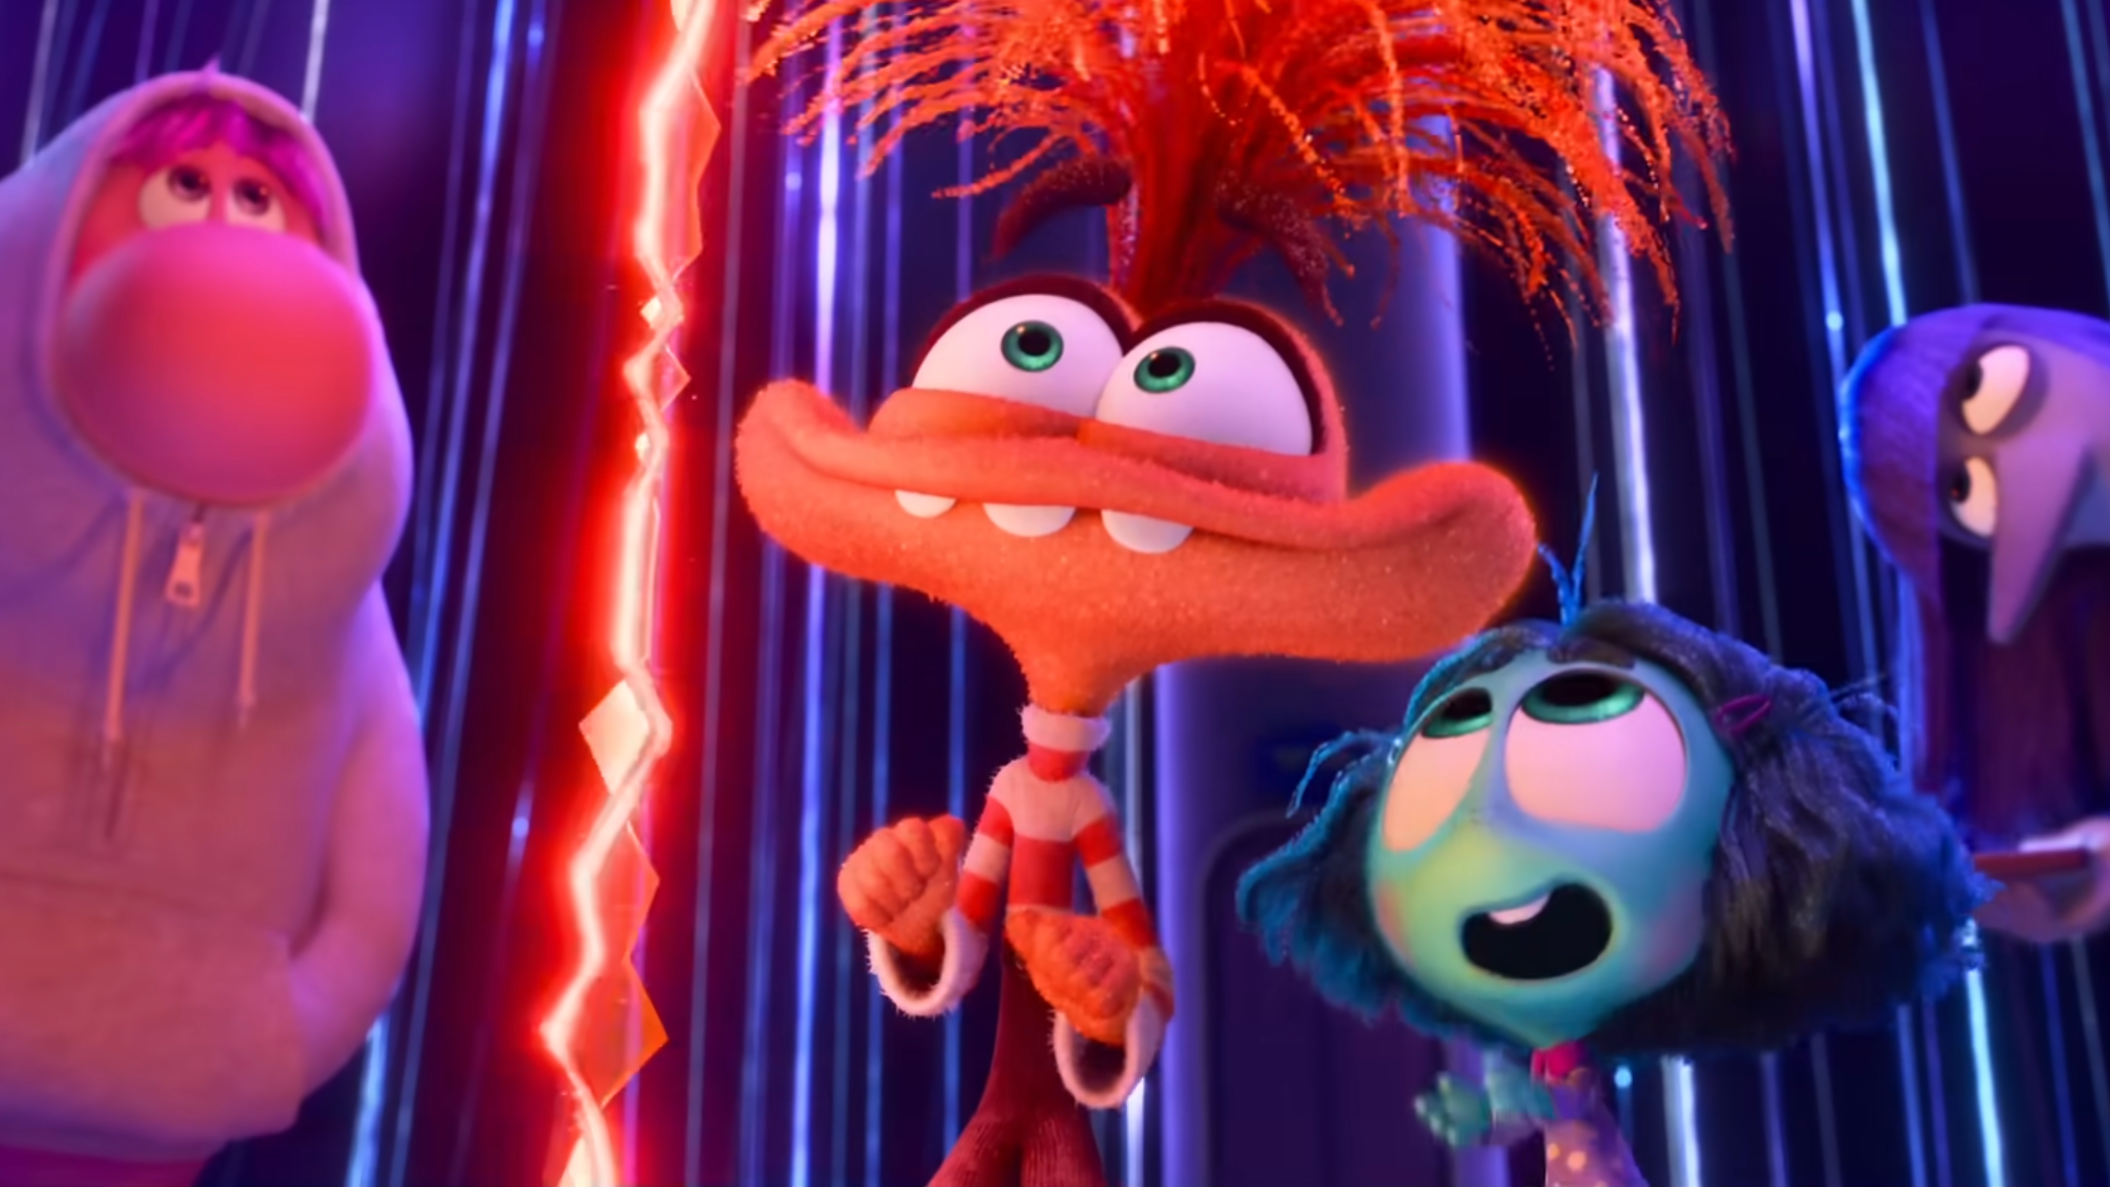 Inside Out 2 handily won the weekend box office (again)